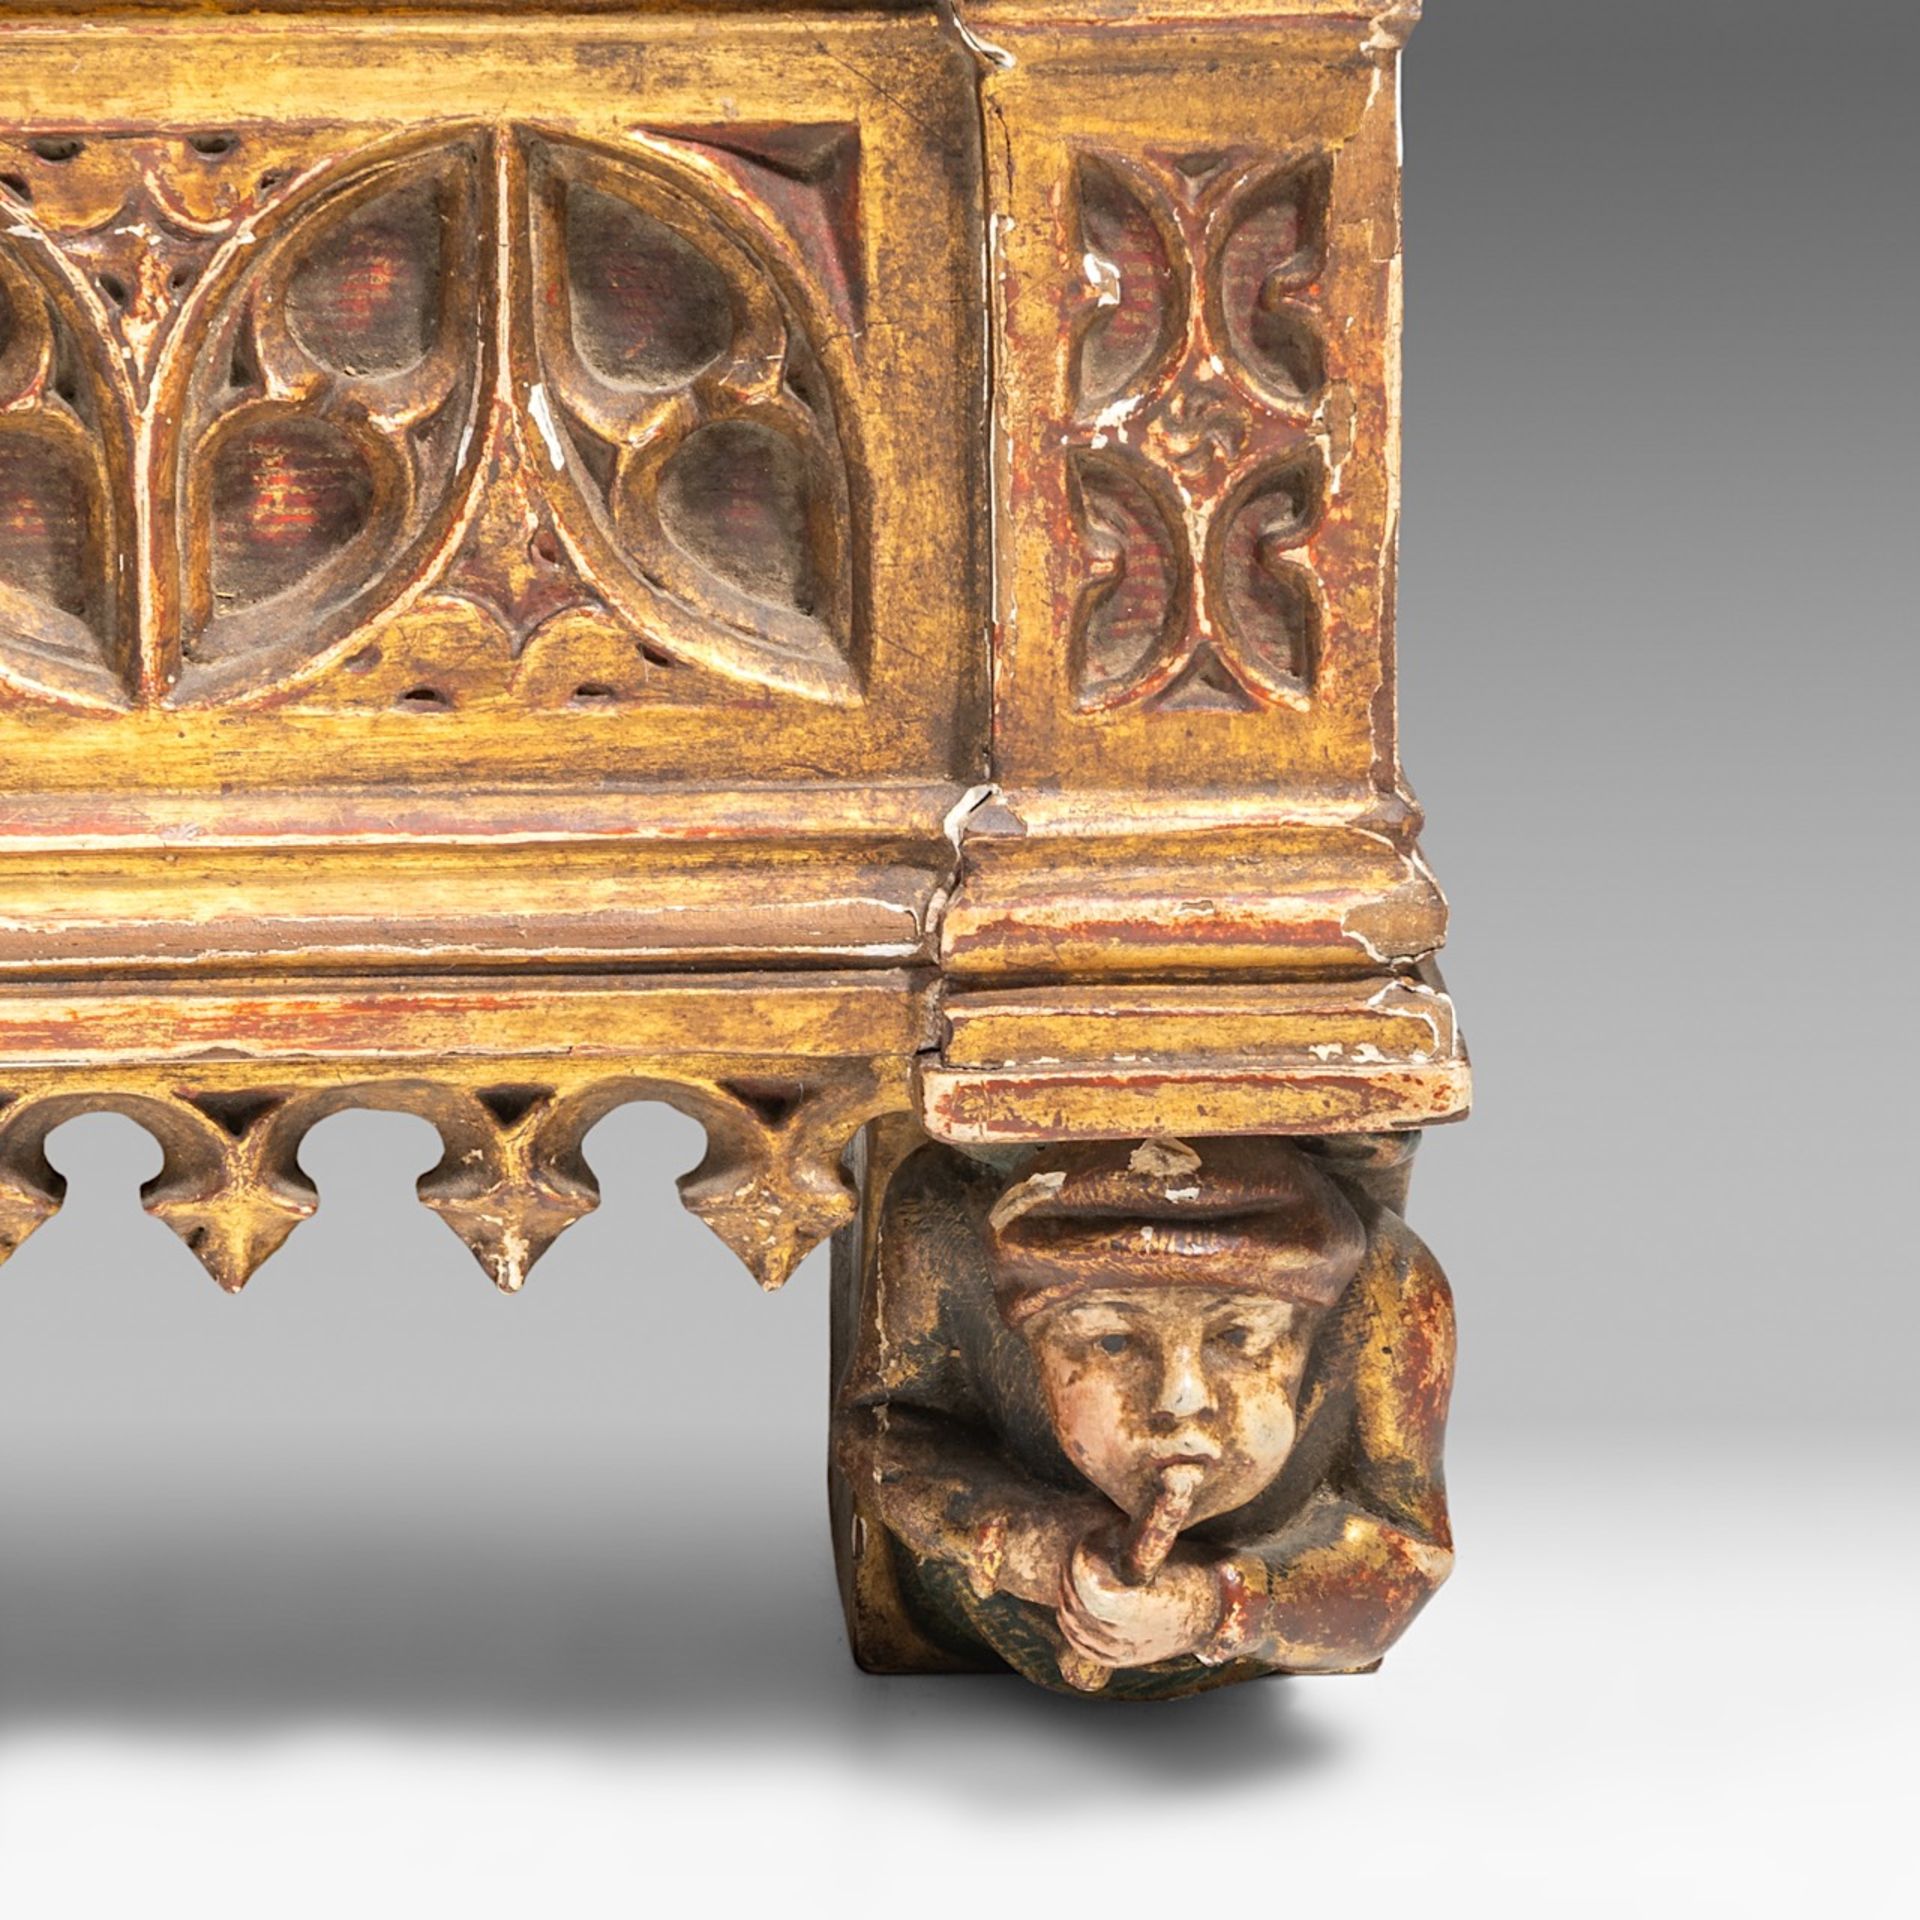 A finely sculpted polychrome and gilt wooden Gothic Revival shrine with a medieval court scene, H 80 - Bild 7 aus 8